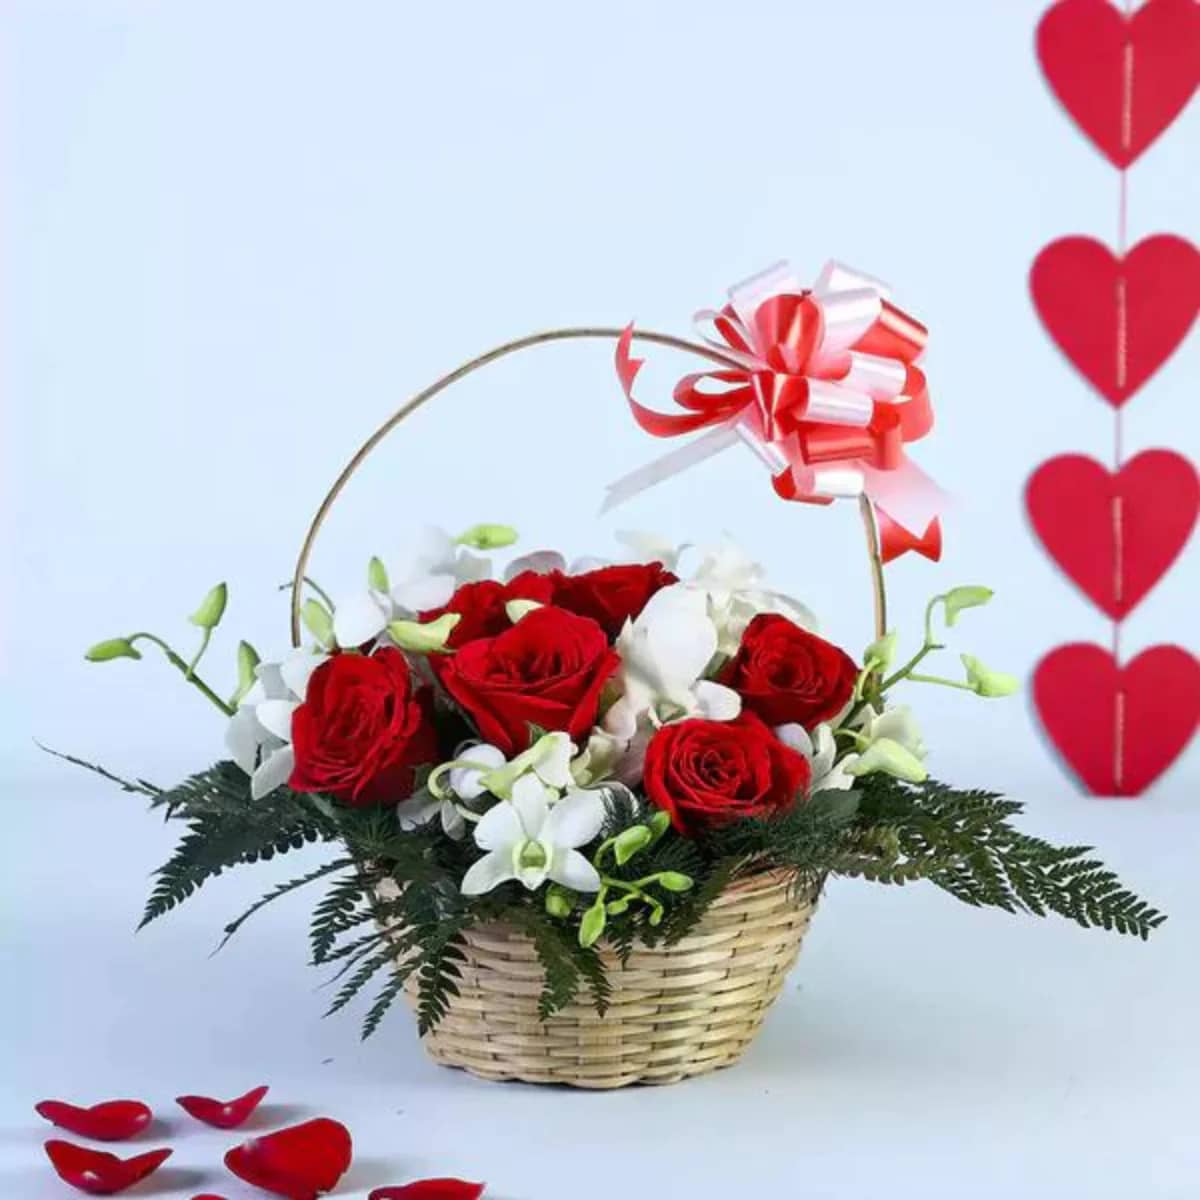 White and Red Roses Basket - Perfect Red Roses Bouquet for Every Occasion